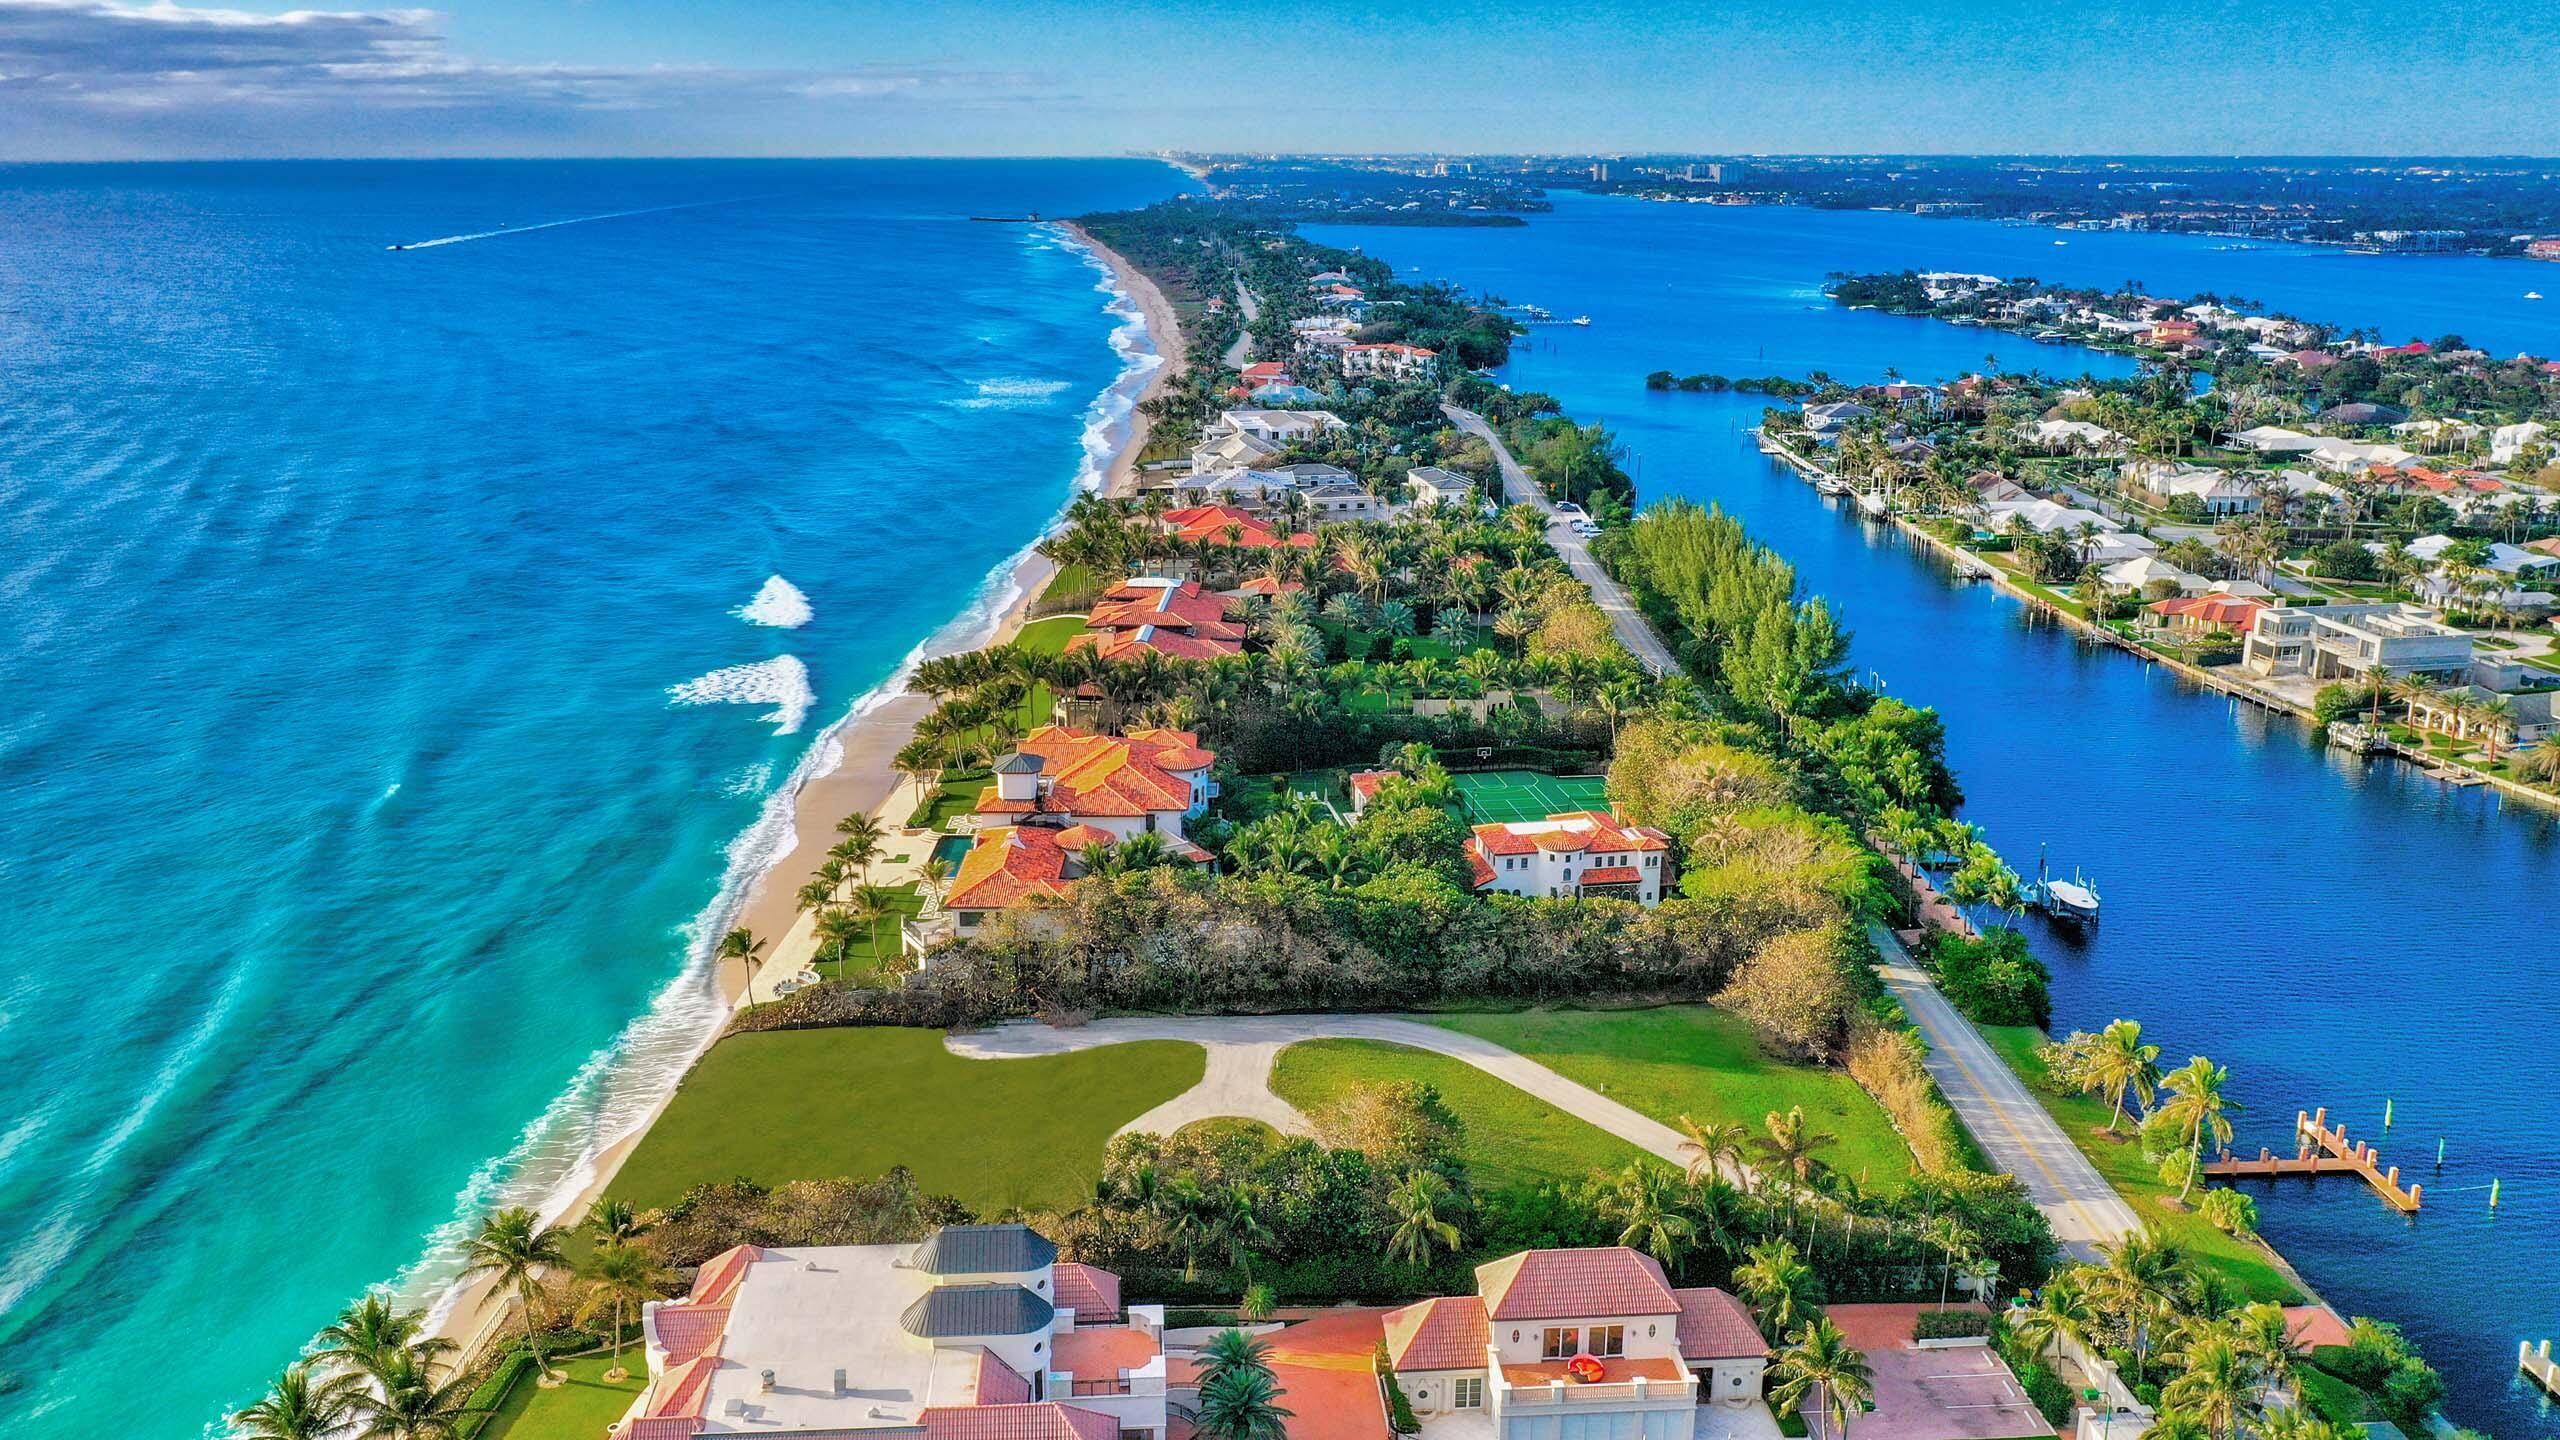 Boasting over 1. 3 acres, this Manalapan estate parcel offers 158 feet of direct oceanfrontage and over 200 feet of direct Intracoastal waterfrontage.